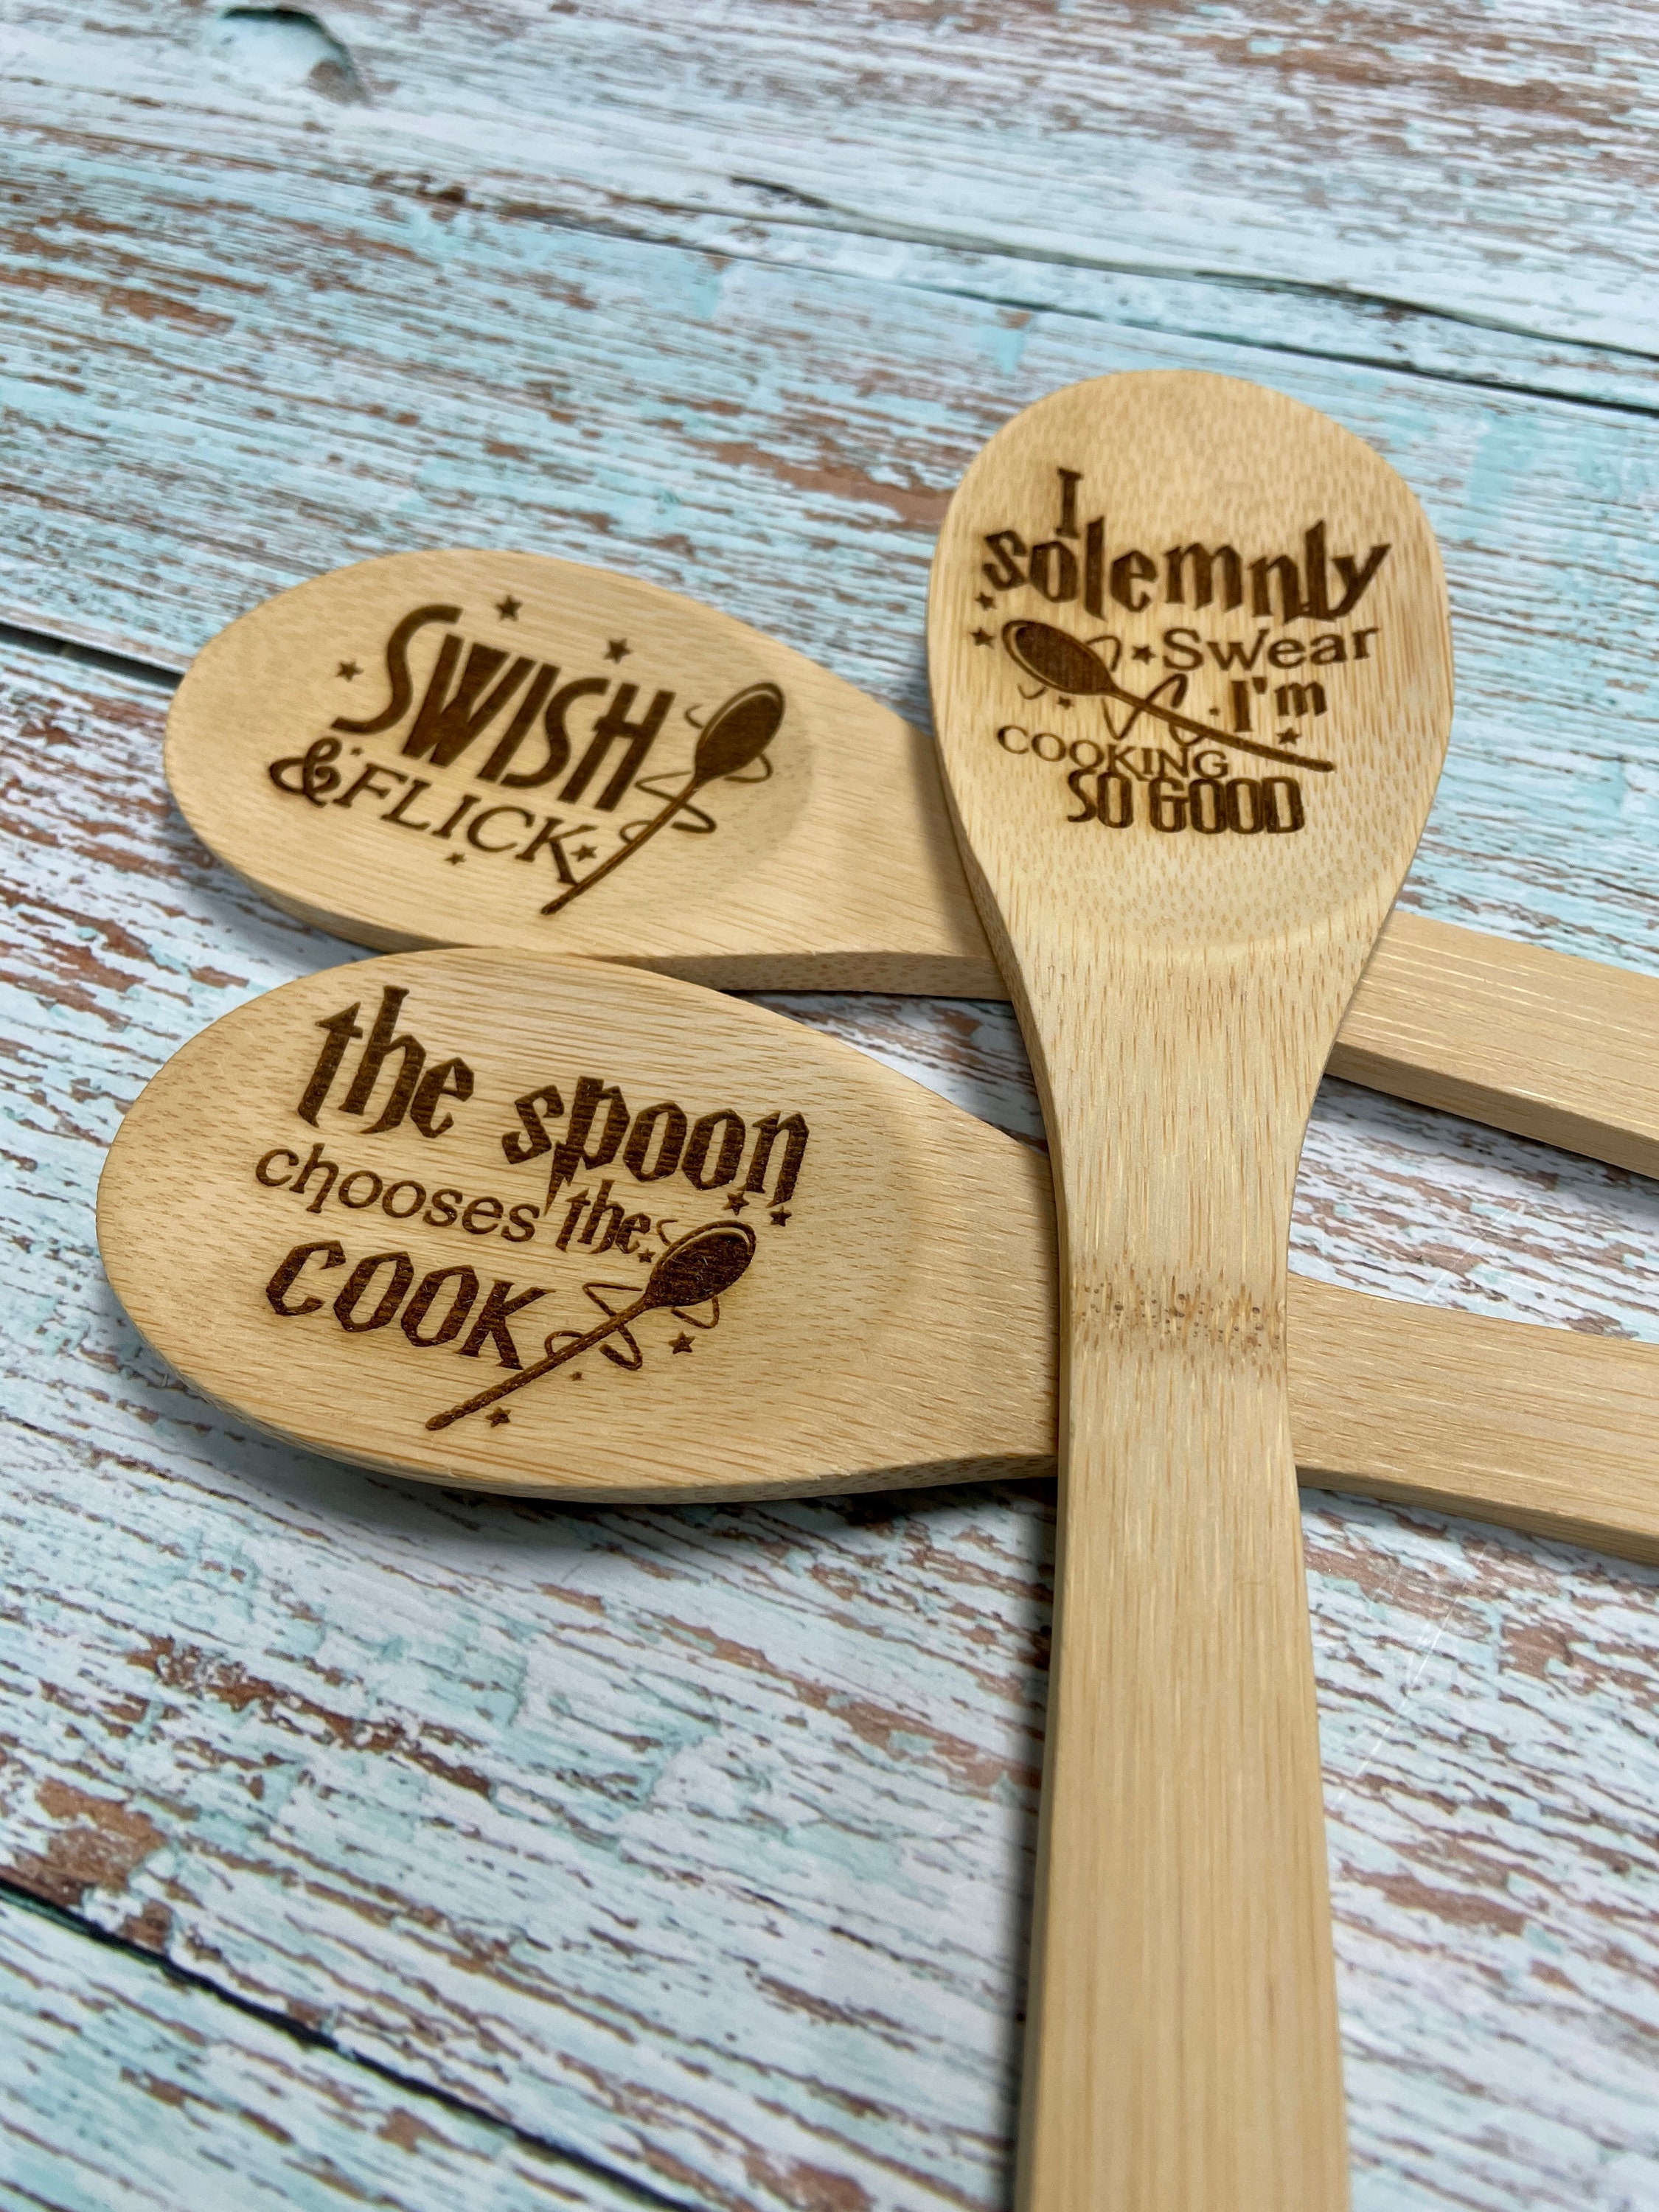 FUTERLY 5 pcs witchy wooden spoons for cooking - witch gifts for women,witch  stuff wooden spatula for kitchen witch decor,cottagecore